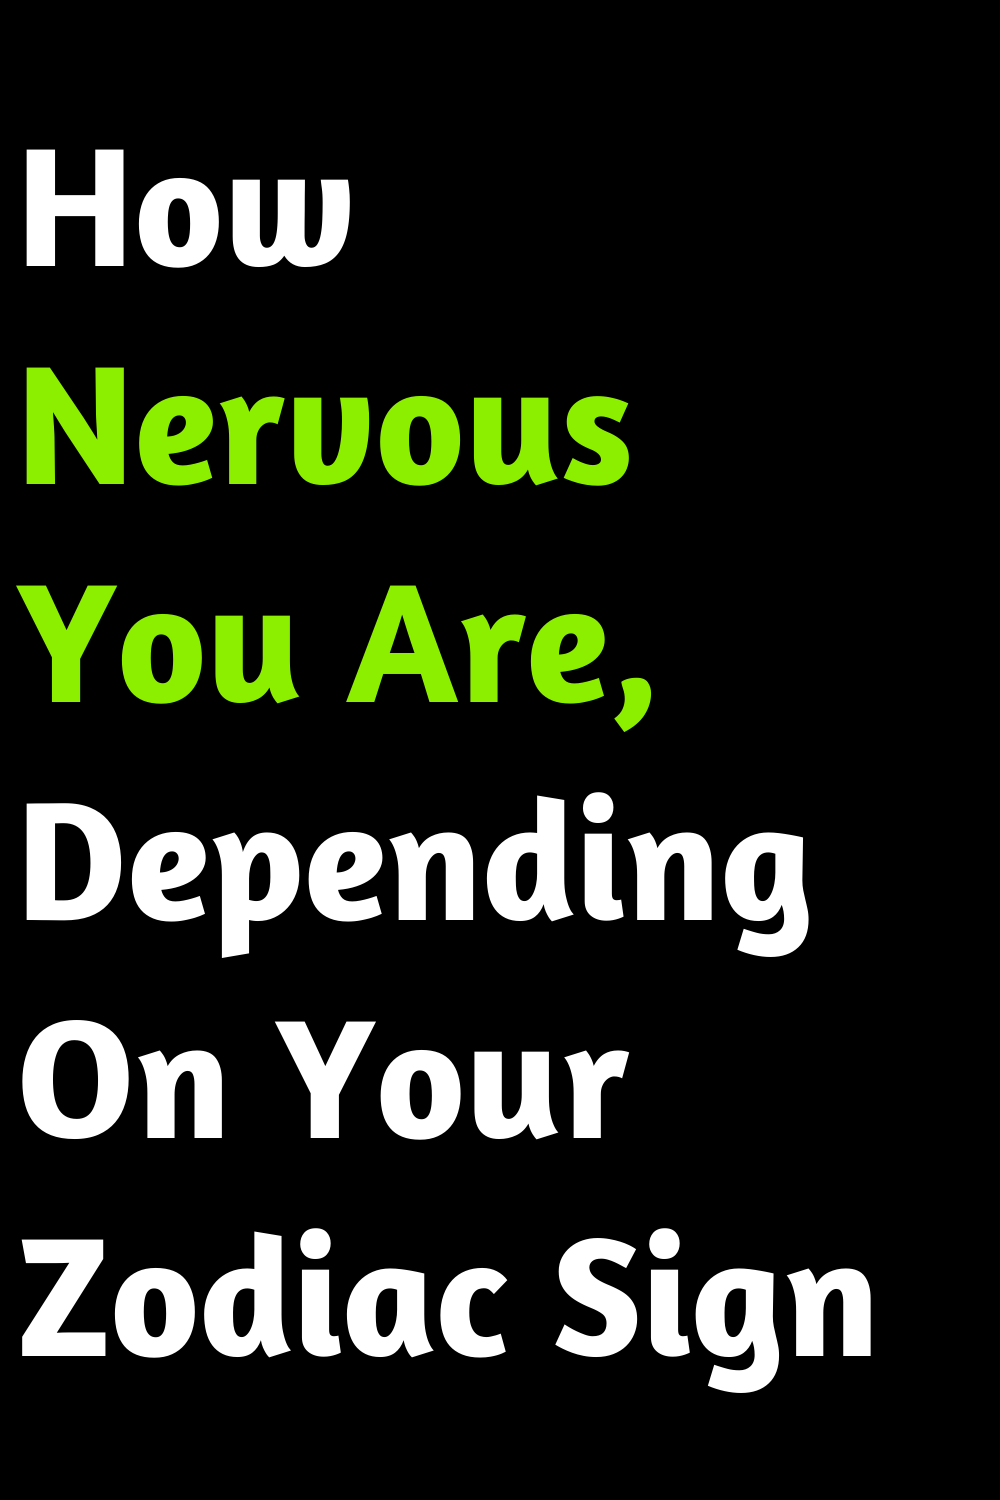 How Nervous You Are, Depending On Your Zodiac Sign